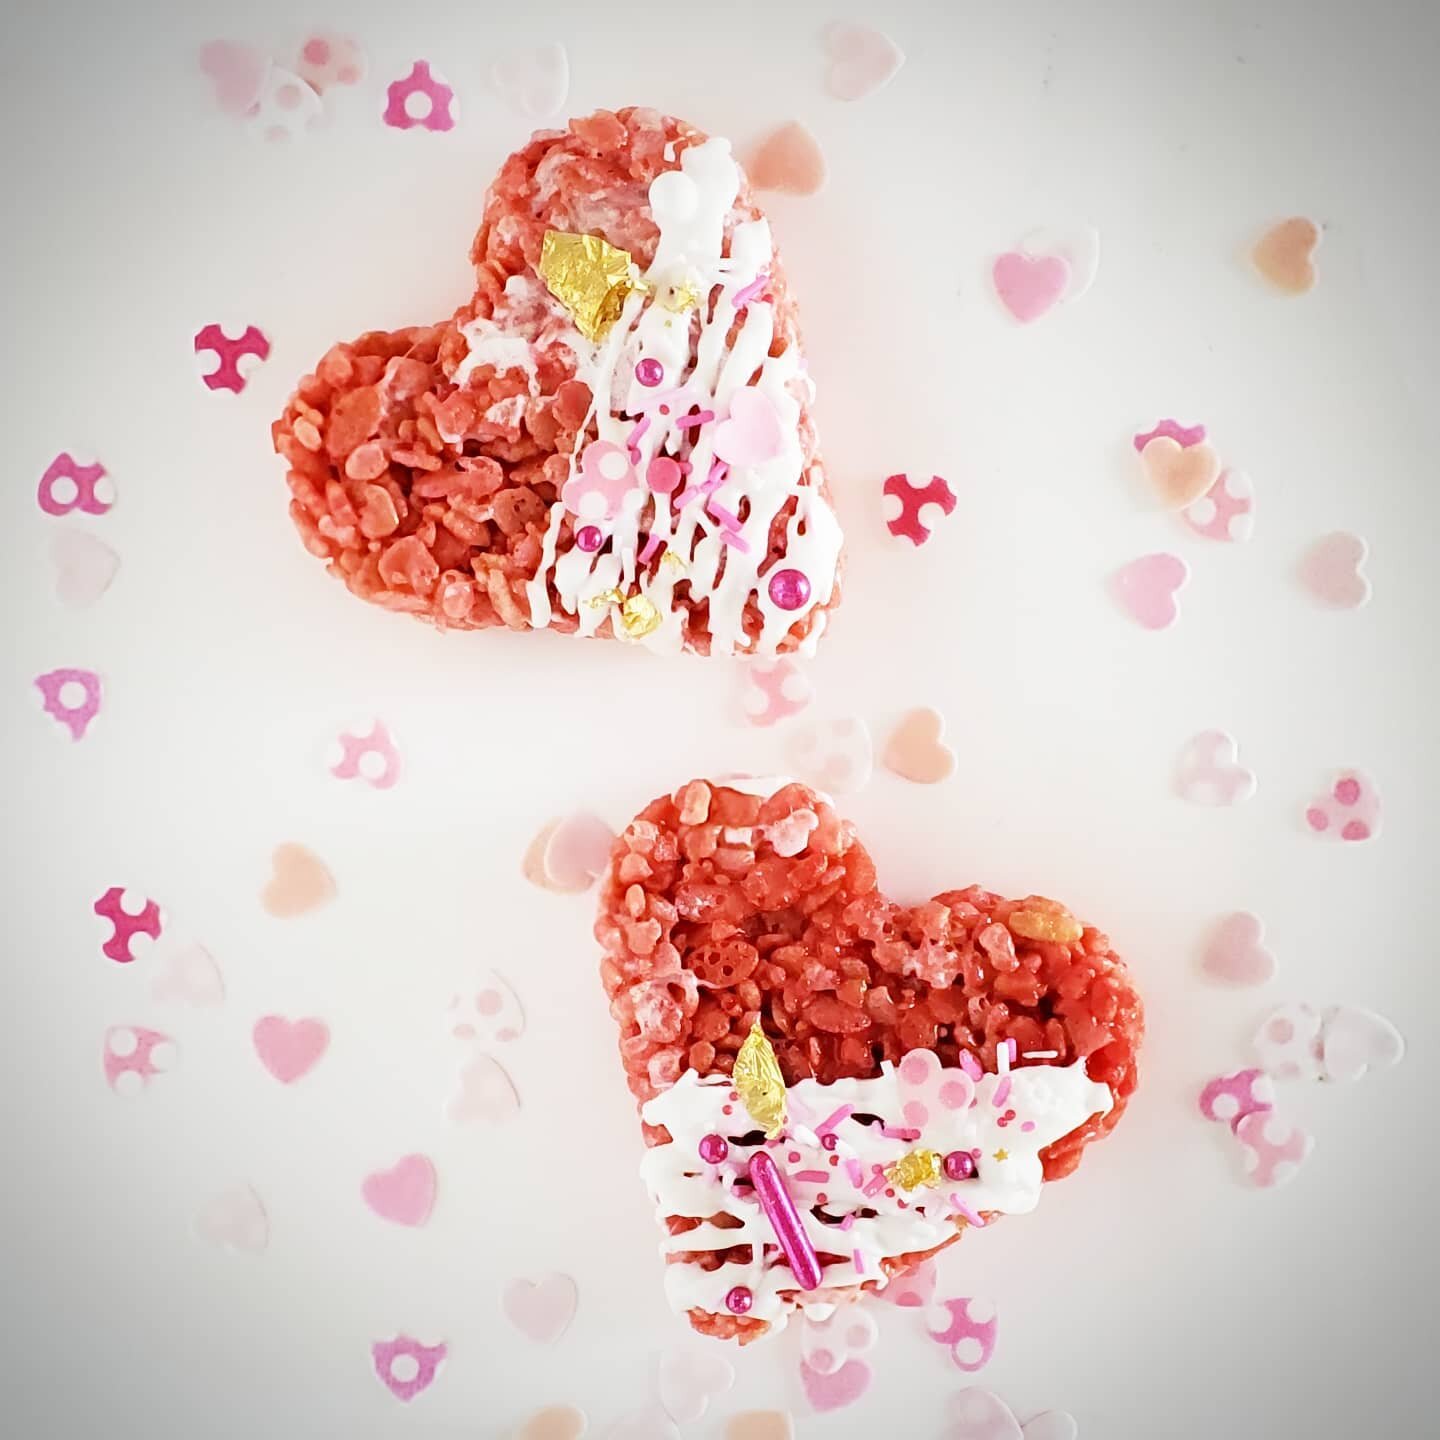 Happy Valentine's Day!!

Sour cherry rice krispy treats with white chocolate drizzle,  and edible 14k gold leaf!
*
*
*
*
#cricketcrumbs #makeityourown #takeitupanotch #hearts #yum #alledible #ricekrispietreats #janesbakerandchef #losangelesbaker #noh